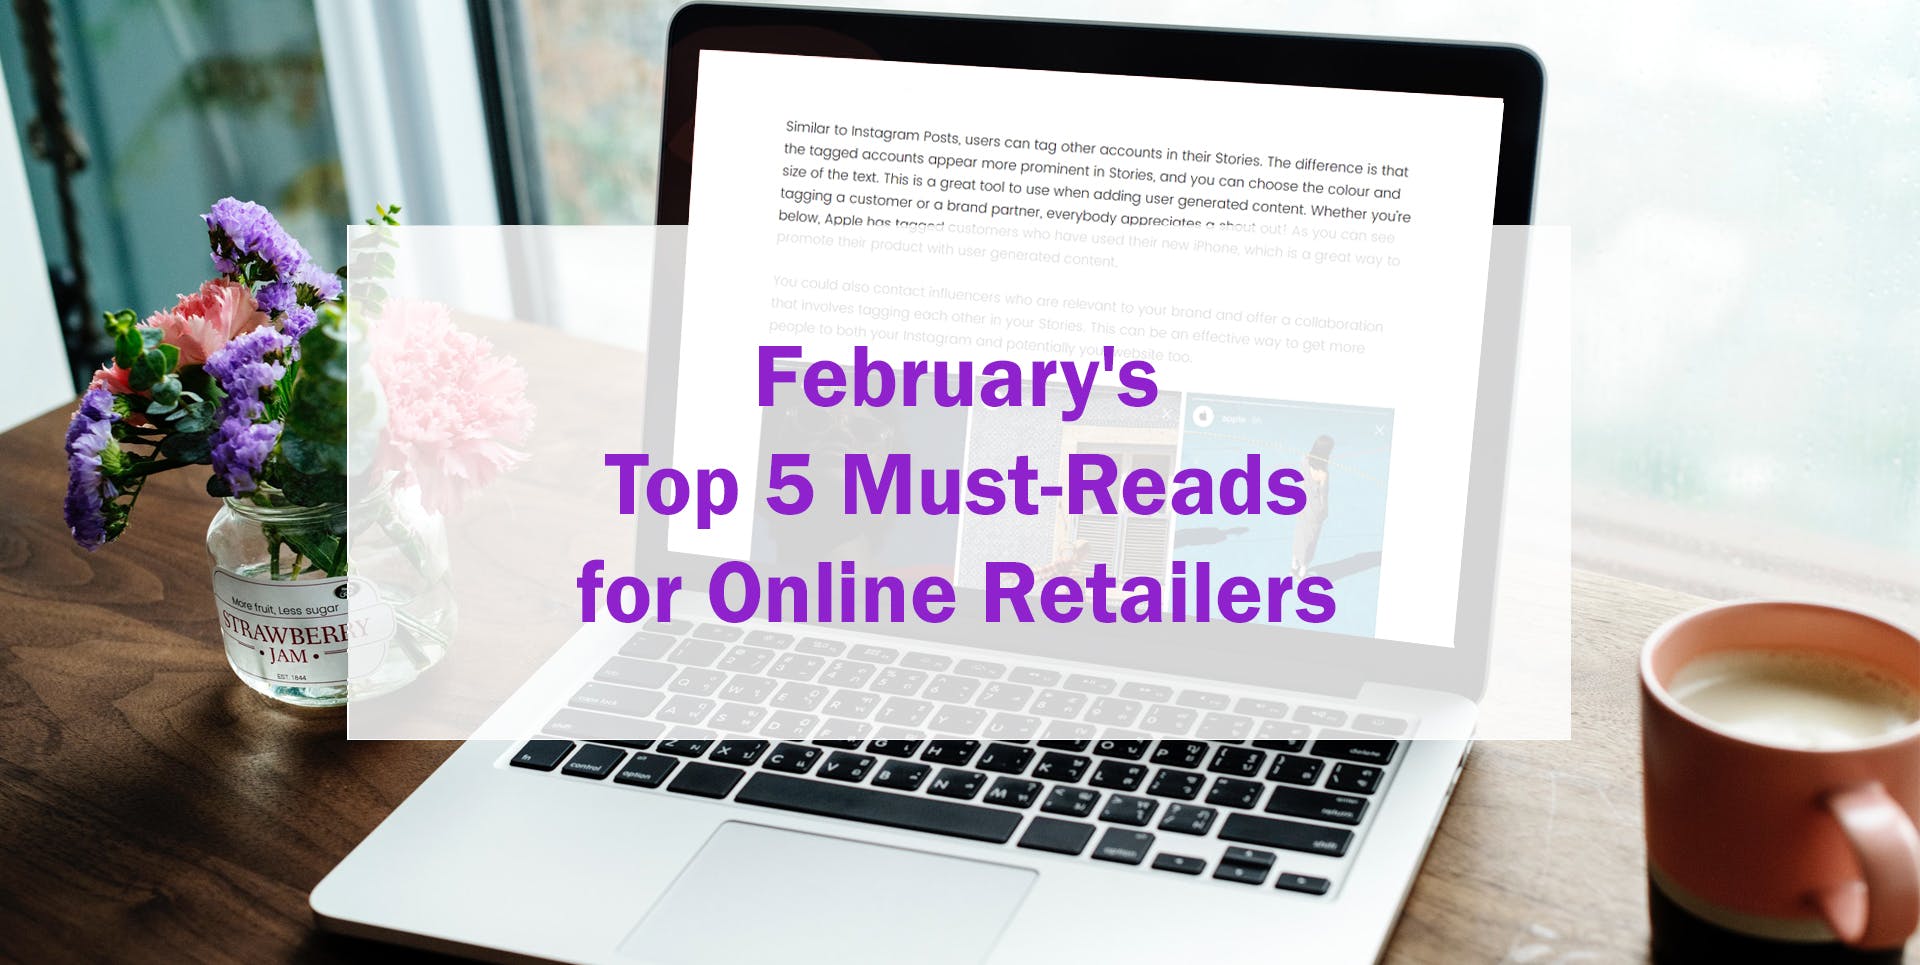 February's Top 5 Must-Reads for Online Retailers